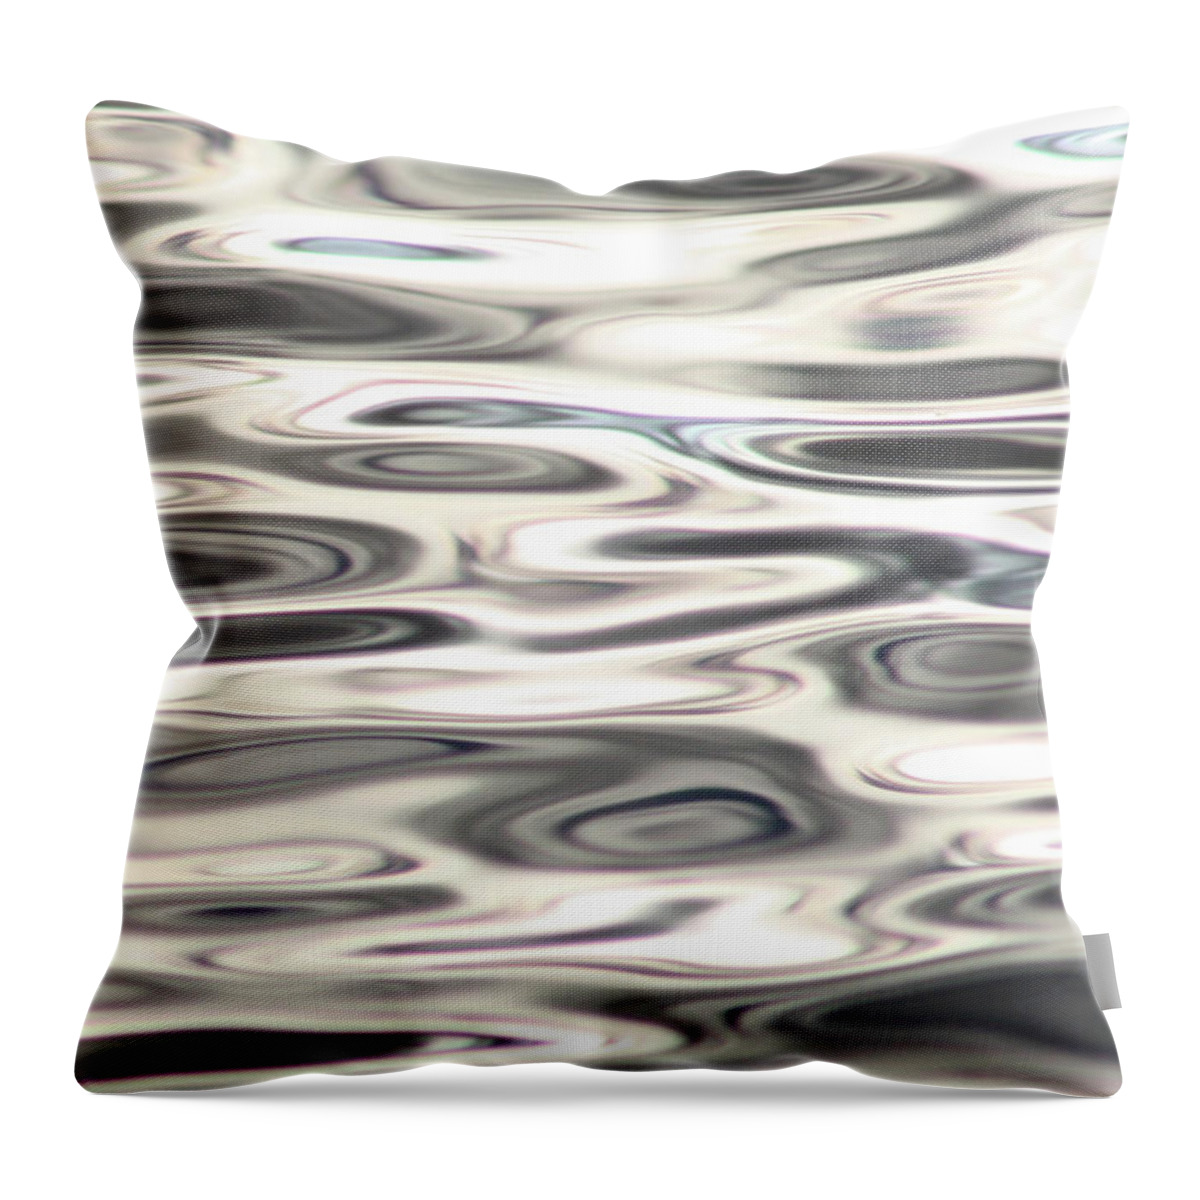 Dancing Light Throw Pillow featuring the photograph Dancing With Light by Cathie Douglas